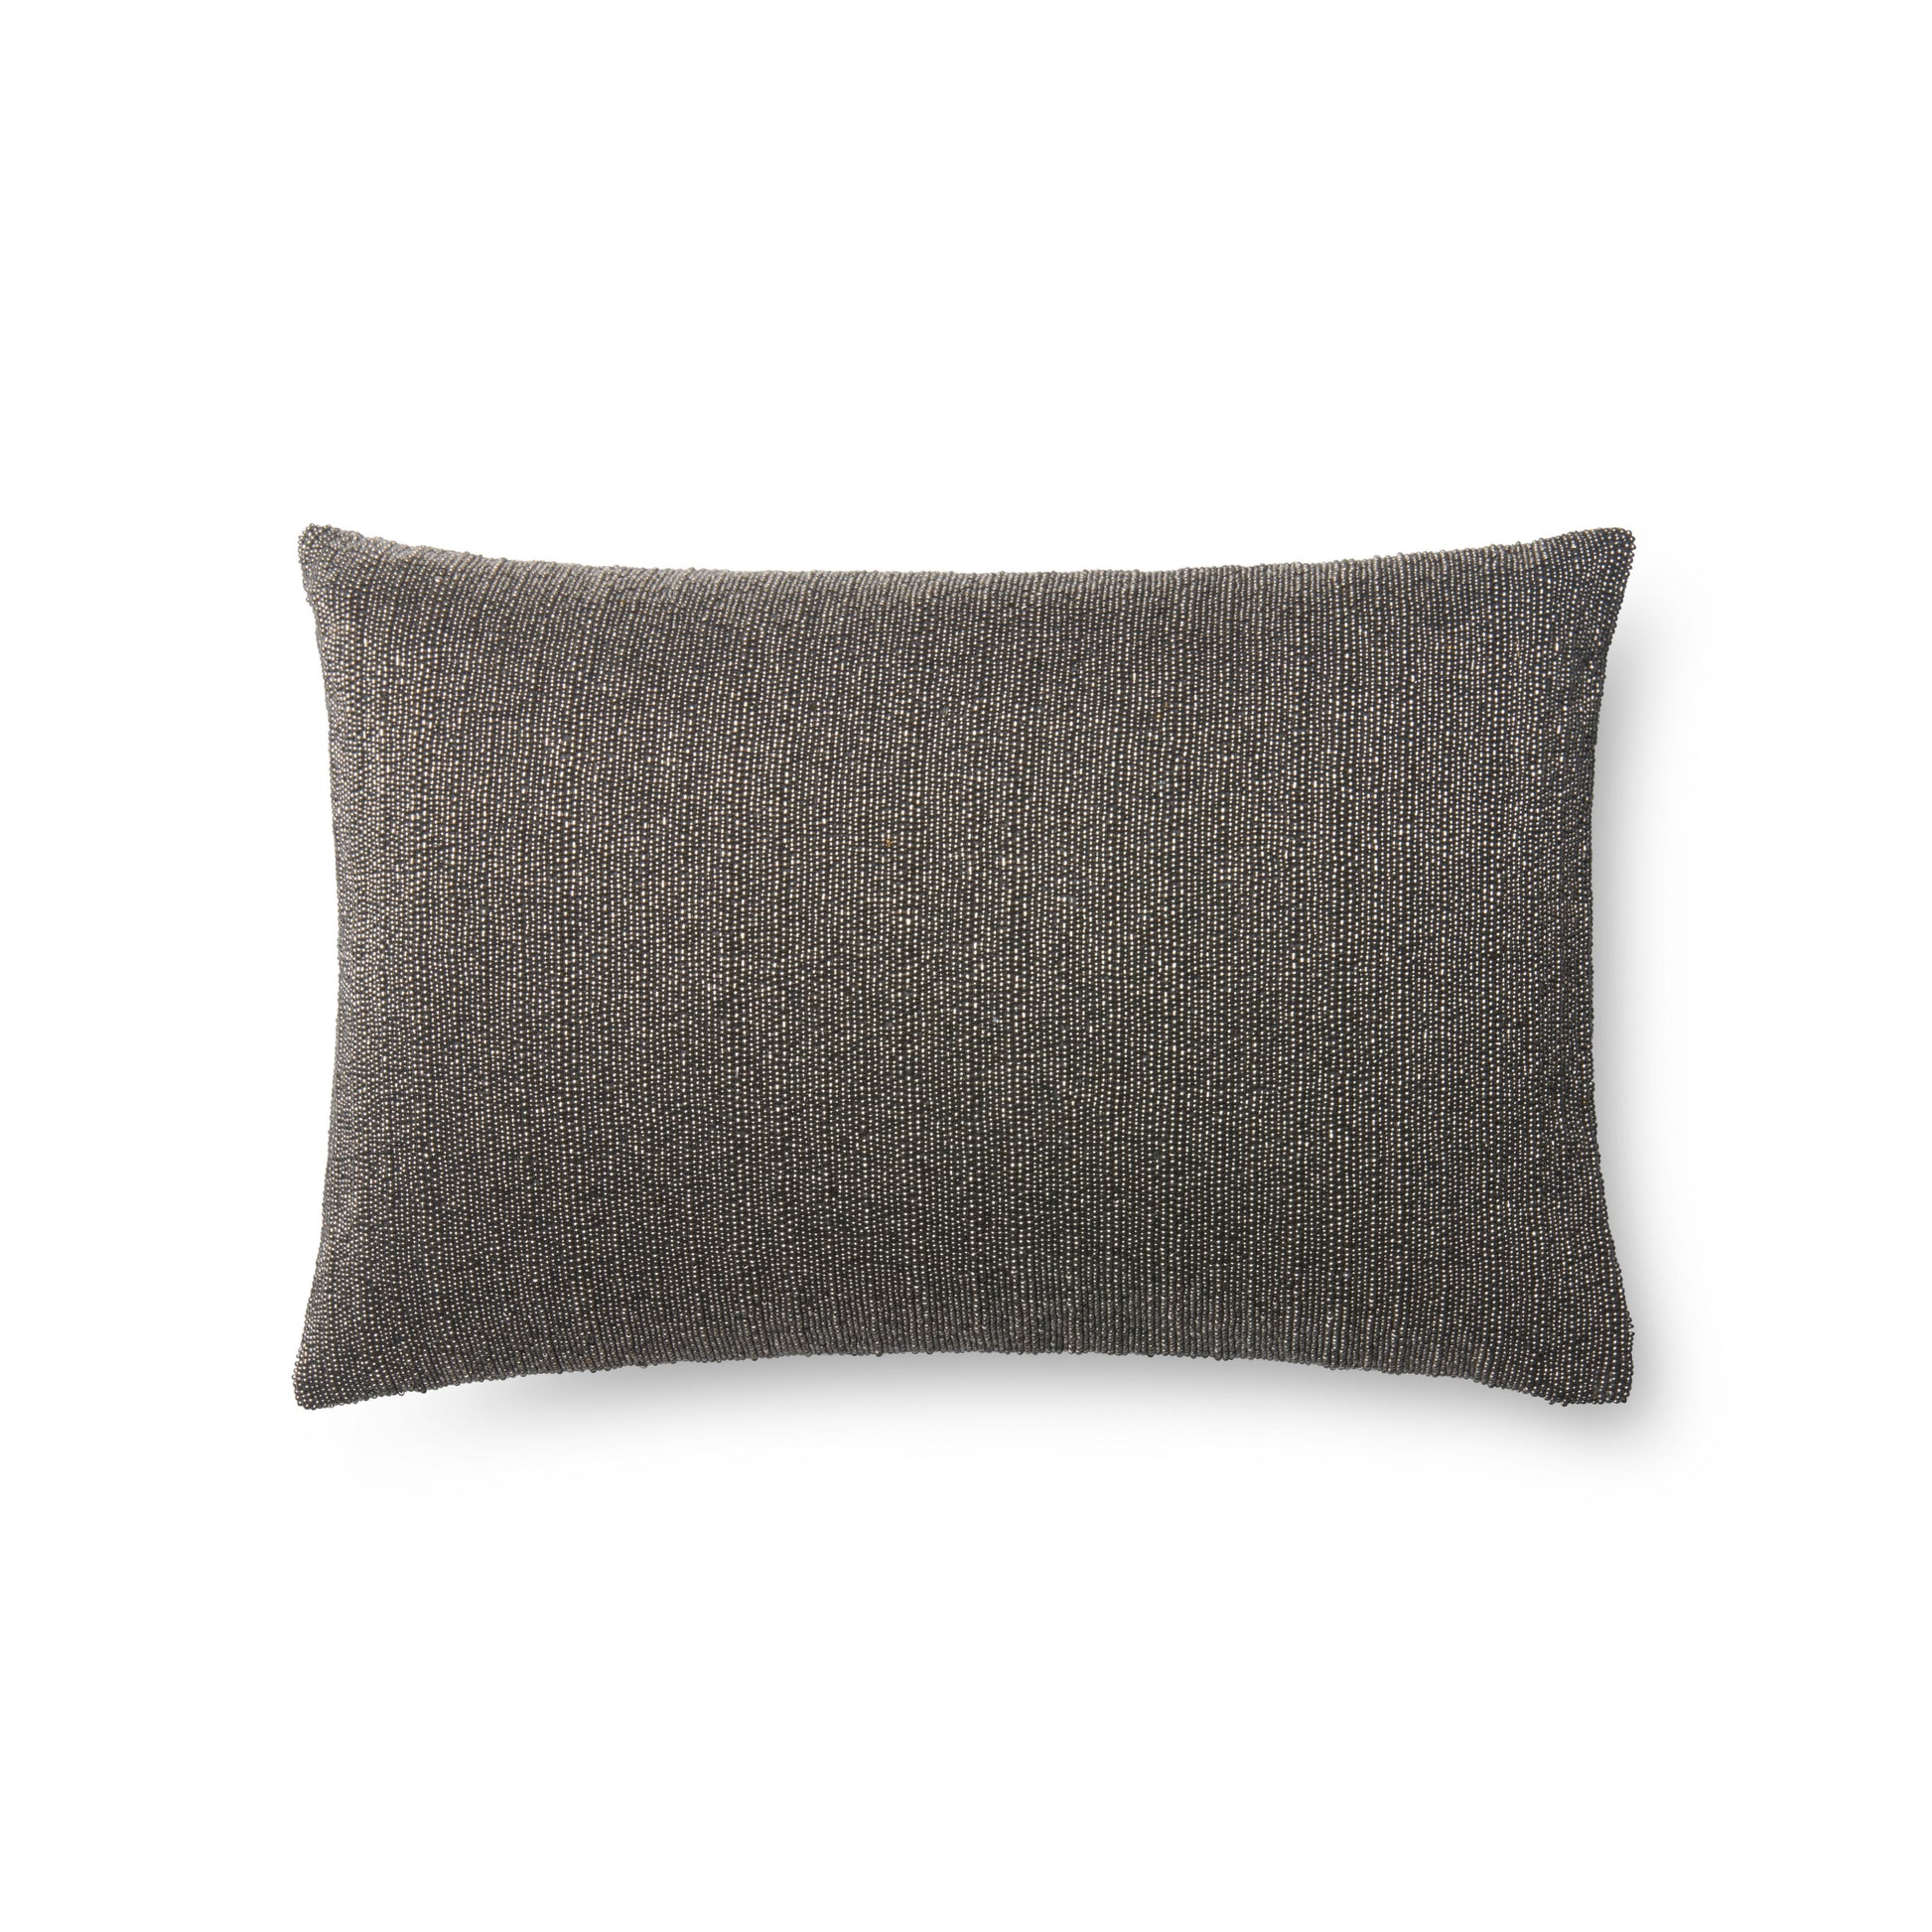 PILLOWS P0599 Synthetic Blend Indoor Pillow from Loloi | Pillow